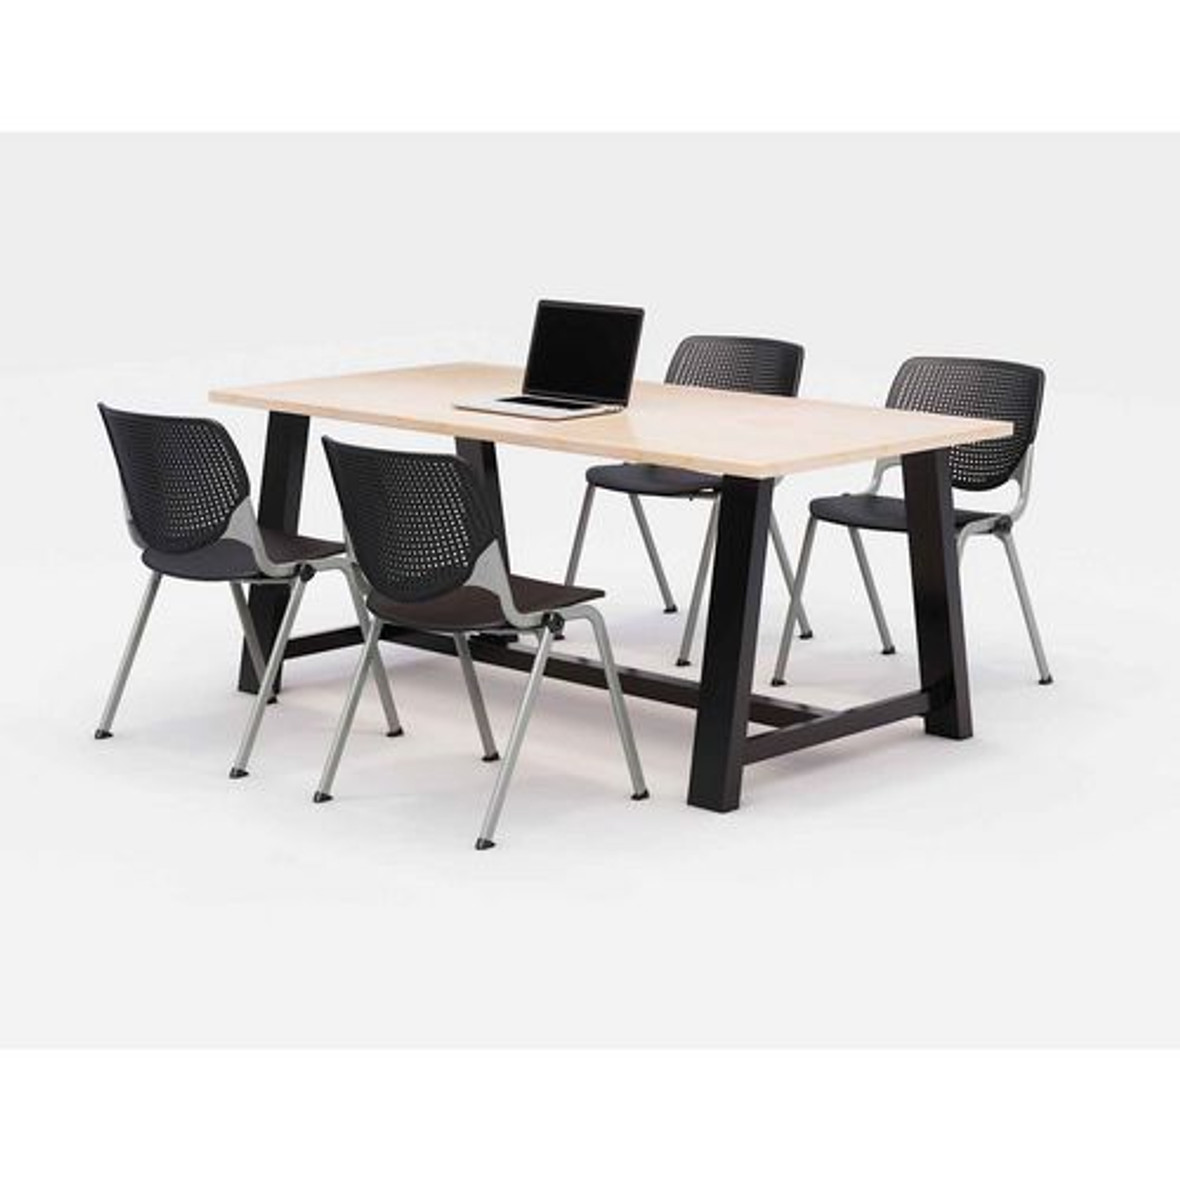 KFI Studios Midtown Dining Table With Four Black Kool Series Chairs, 36 X 72 X 30, Kensington Maple, Ships In 4-6 Business Days